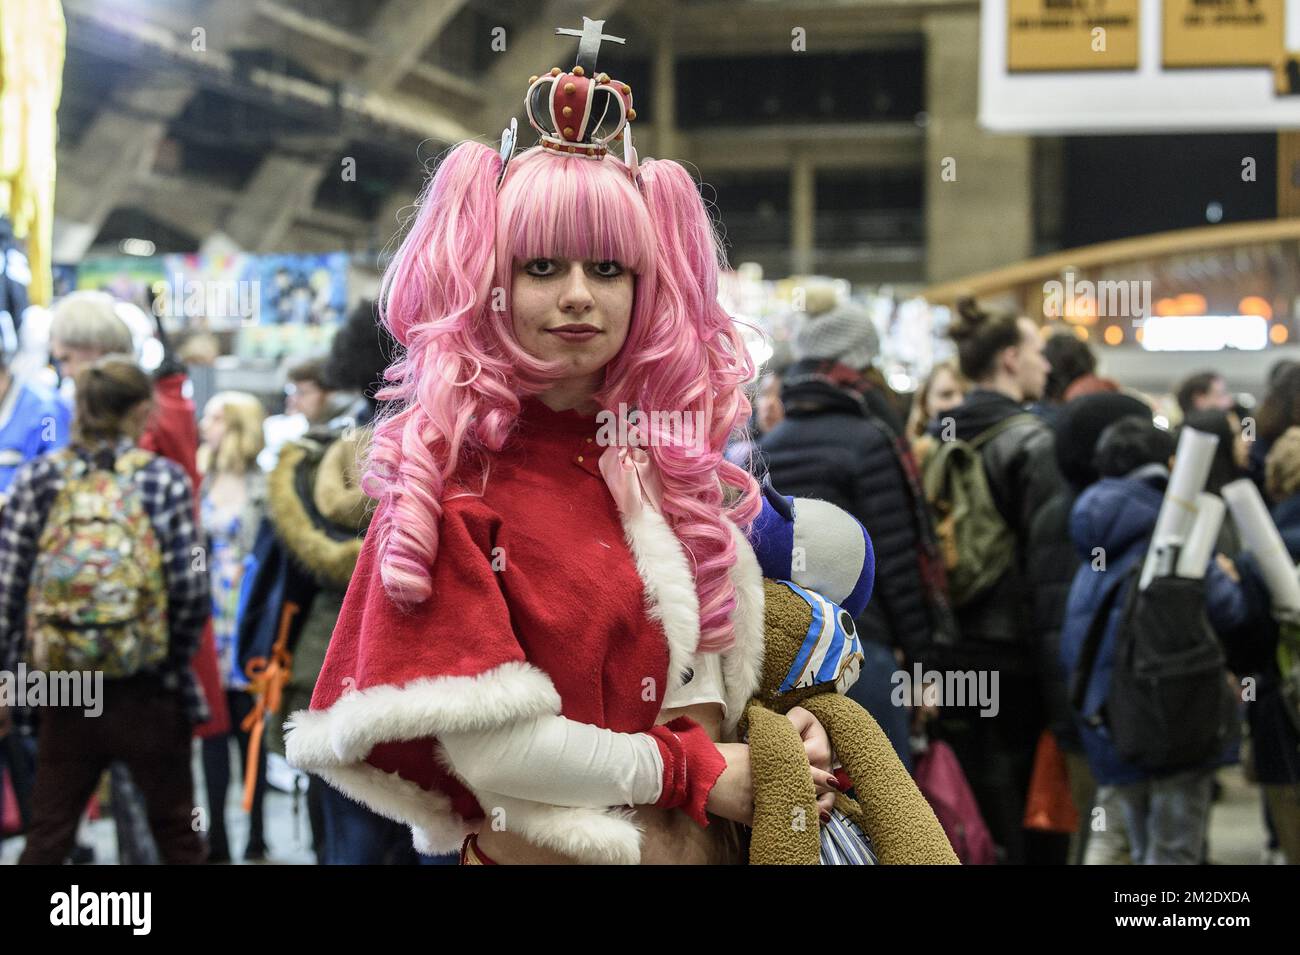 Ninth edition of Made in Asia in Brussels | Neuvieme edition du salon Made in Asia - Culture pop manga asiatique 17/03/2018 Stock Photo